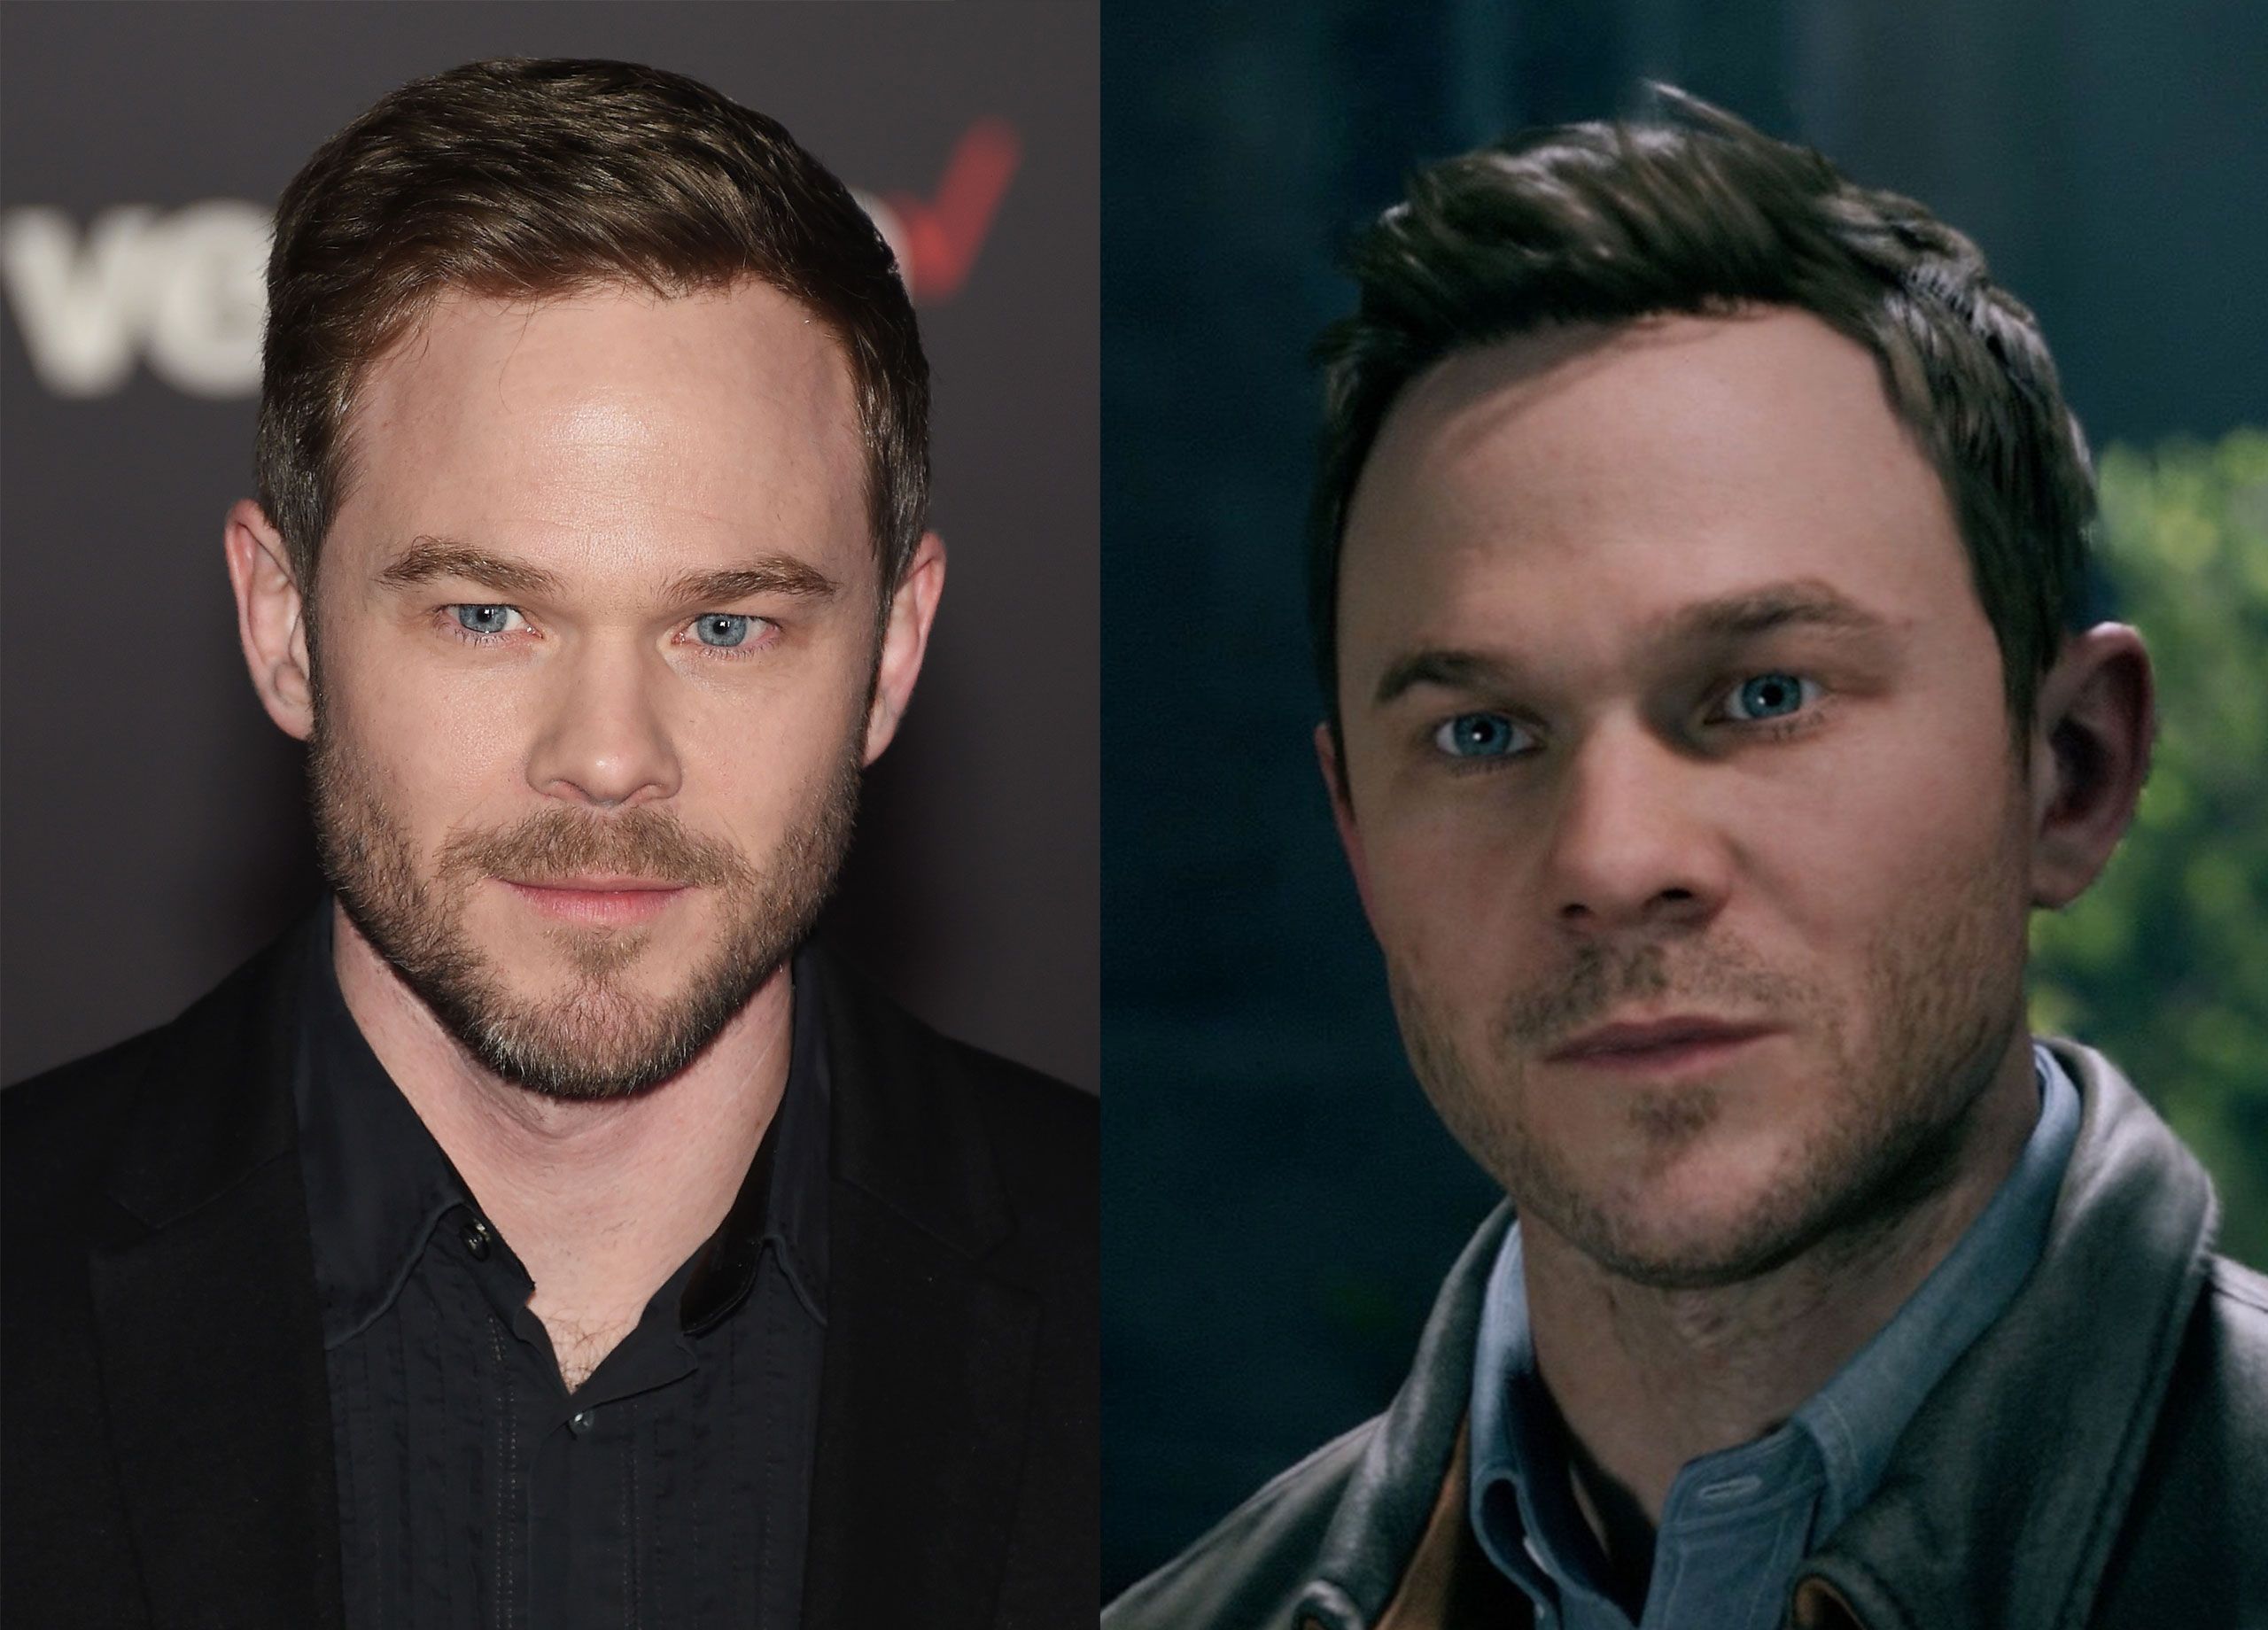 Is shawn ashmore gay